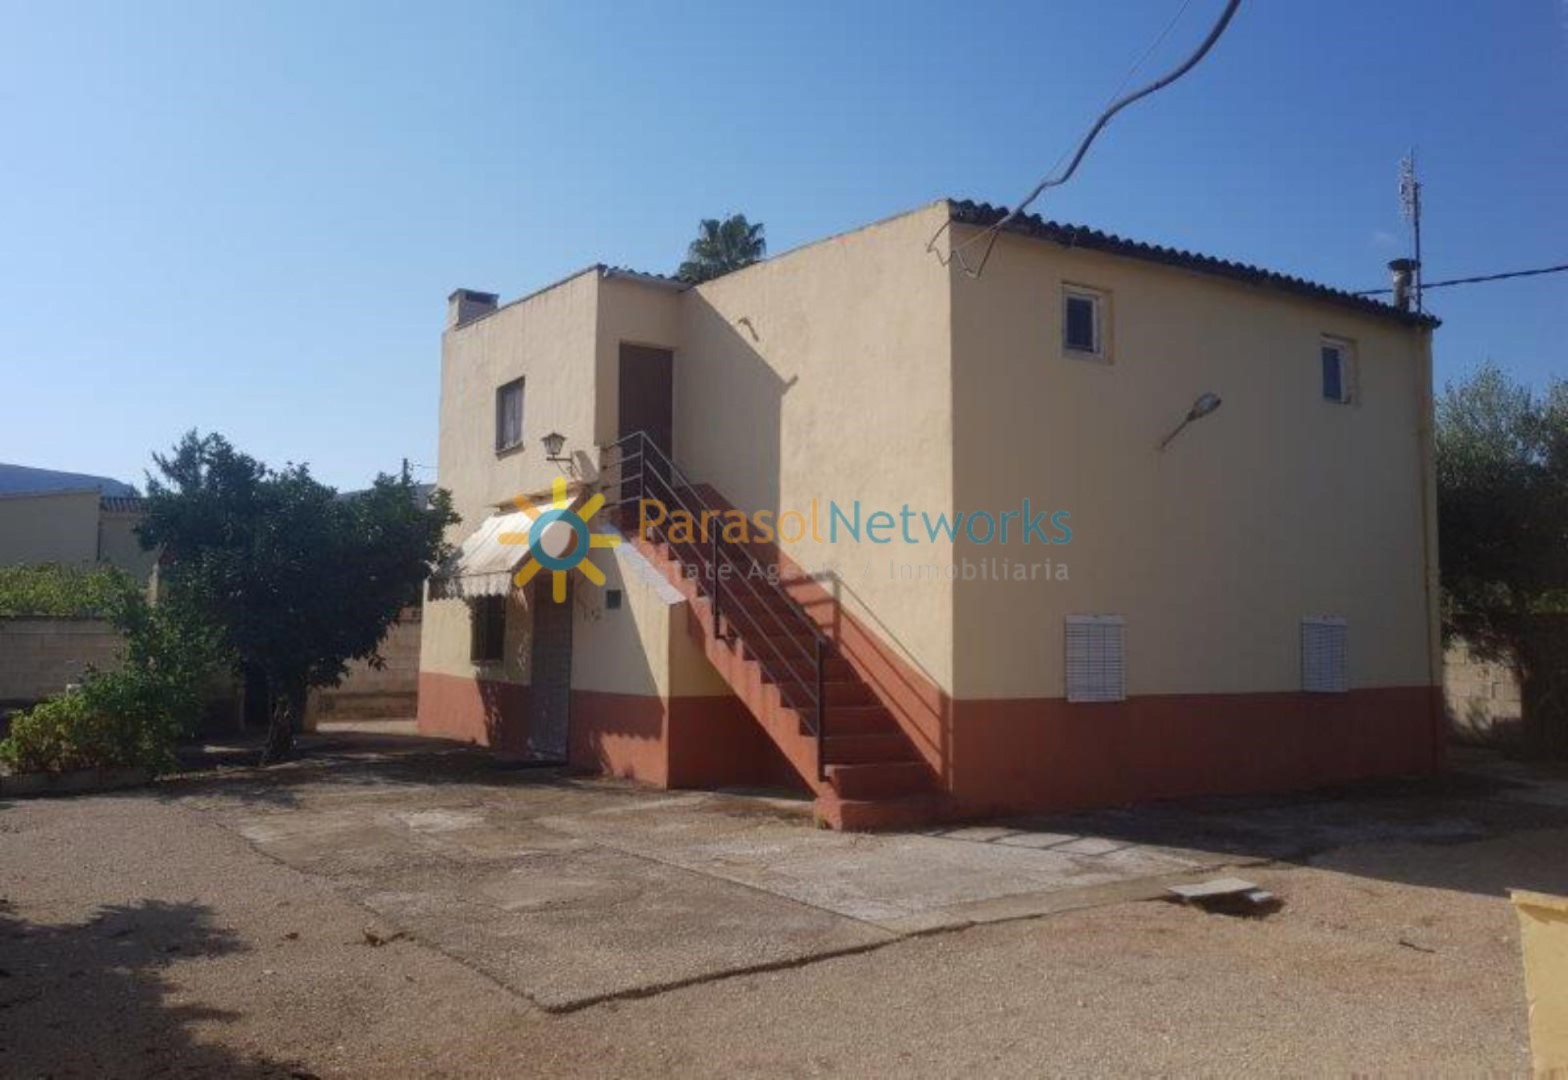 Villa for sale in Ontinyent- Ref:3367